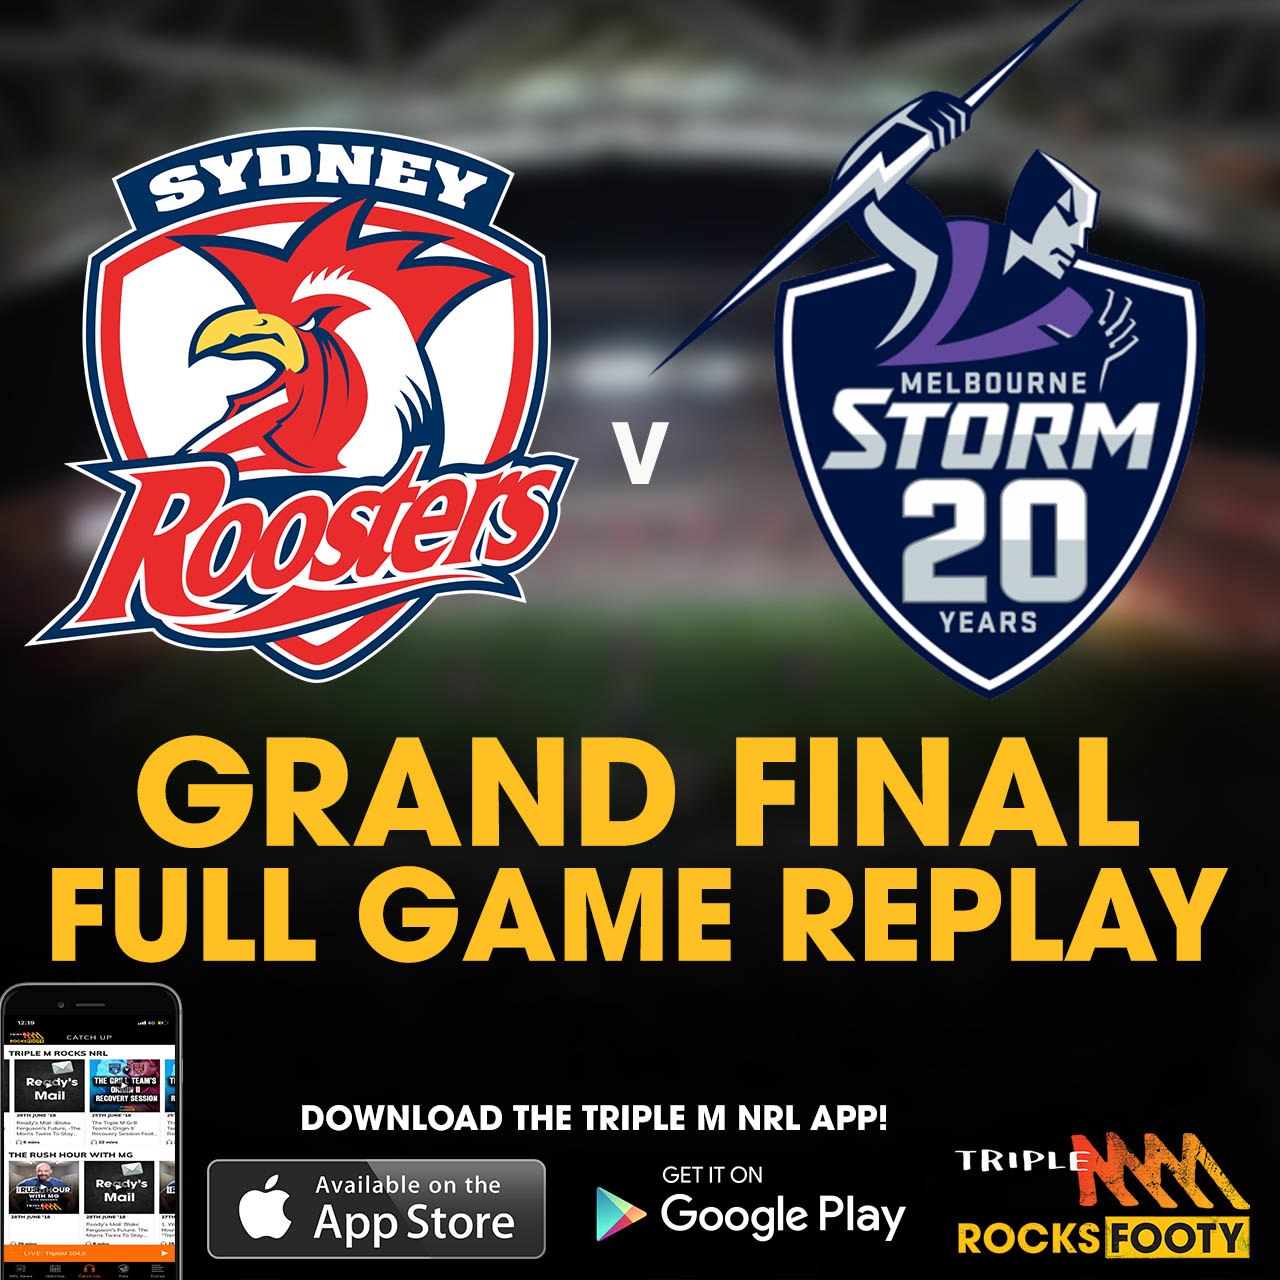 2018 NRL Grand Final Full Game Replay | Roosters v Storm